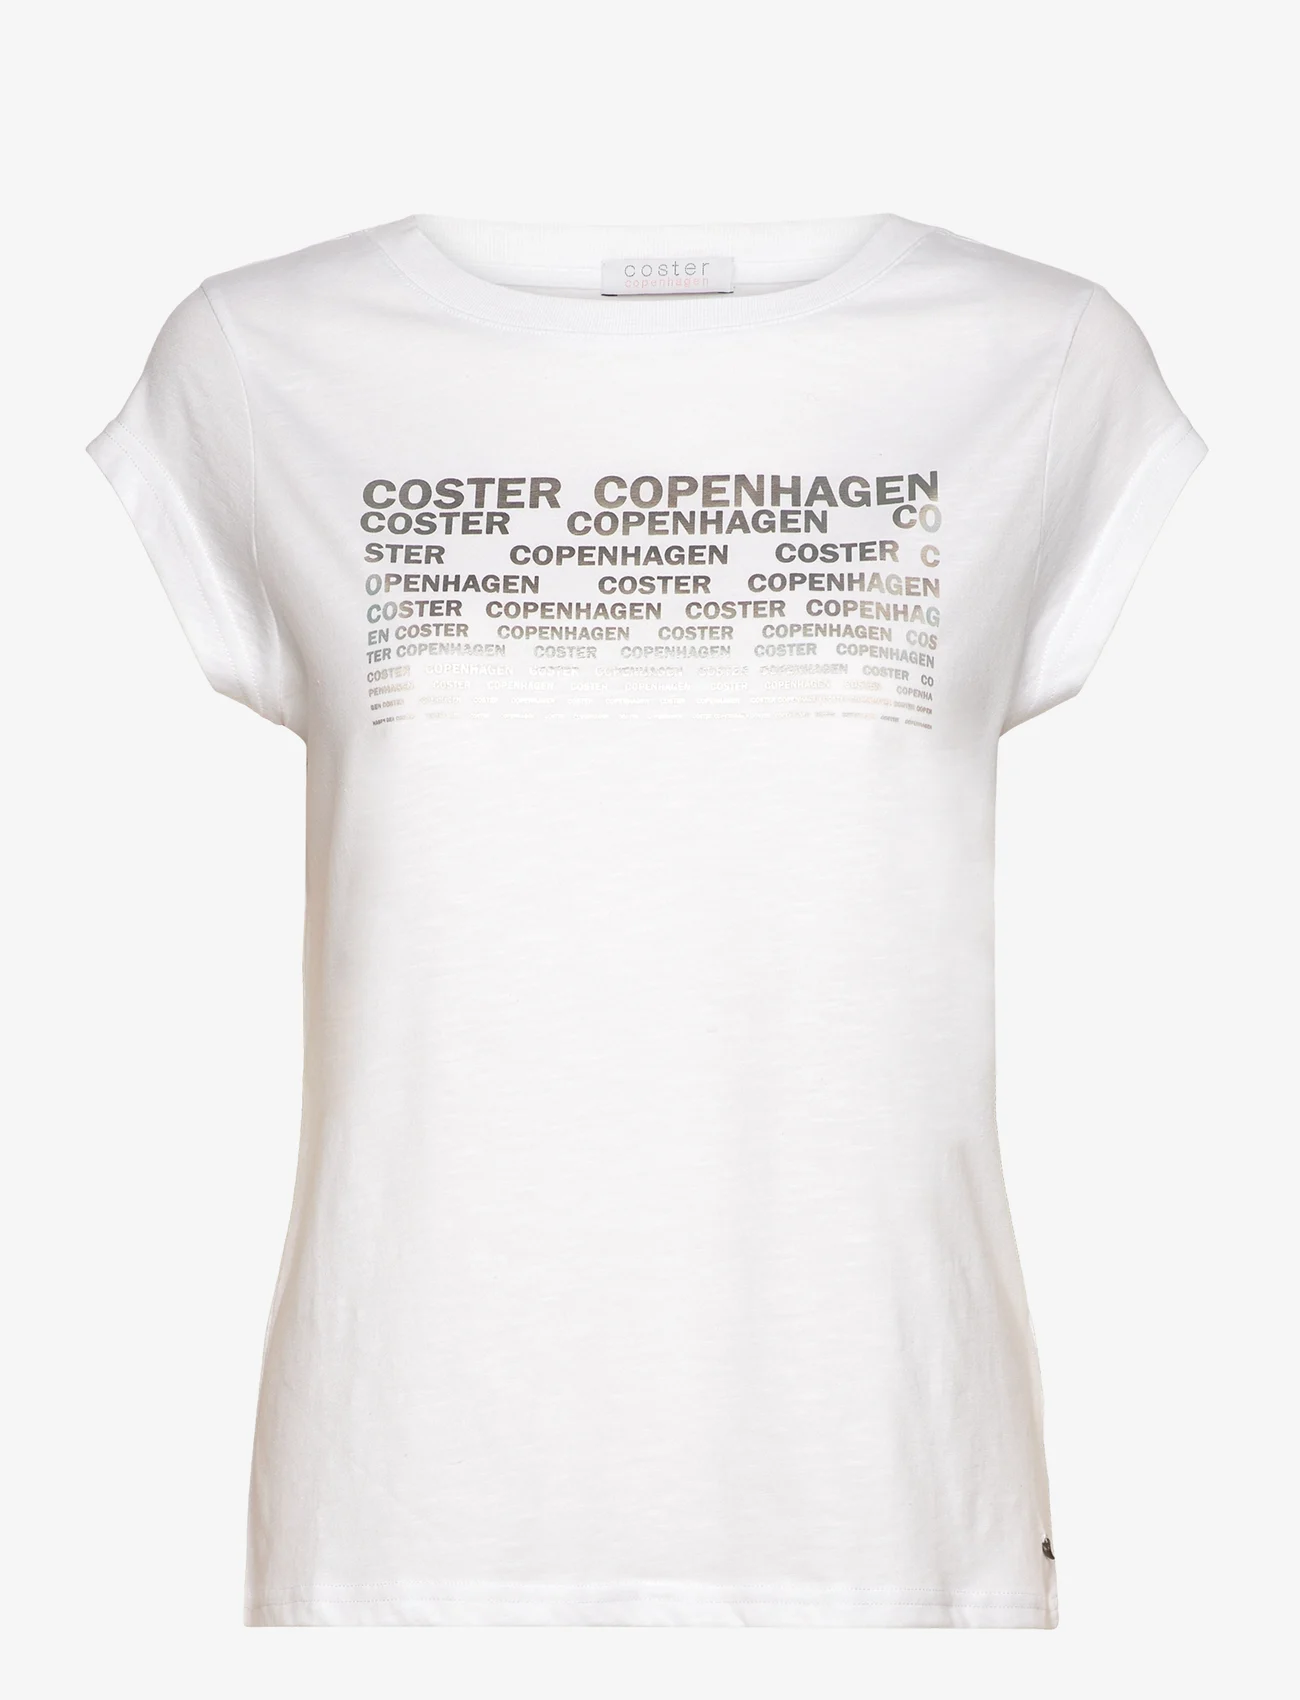 Coster Copenhagen - T-shirt with Coster print - Cap sle - t-shirts - white - 0